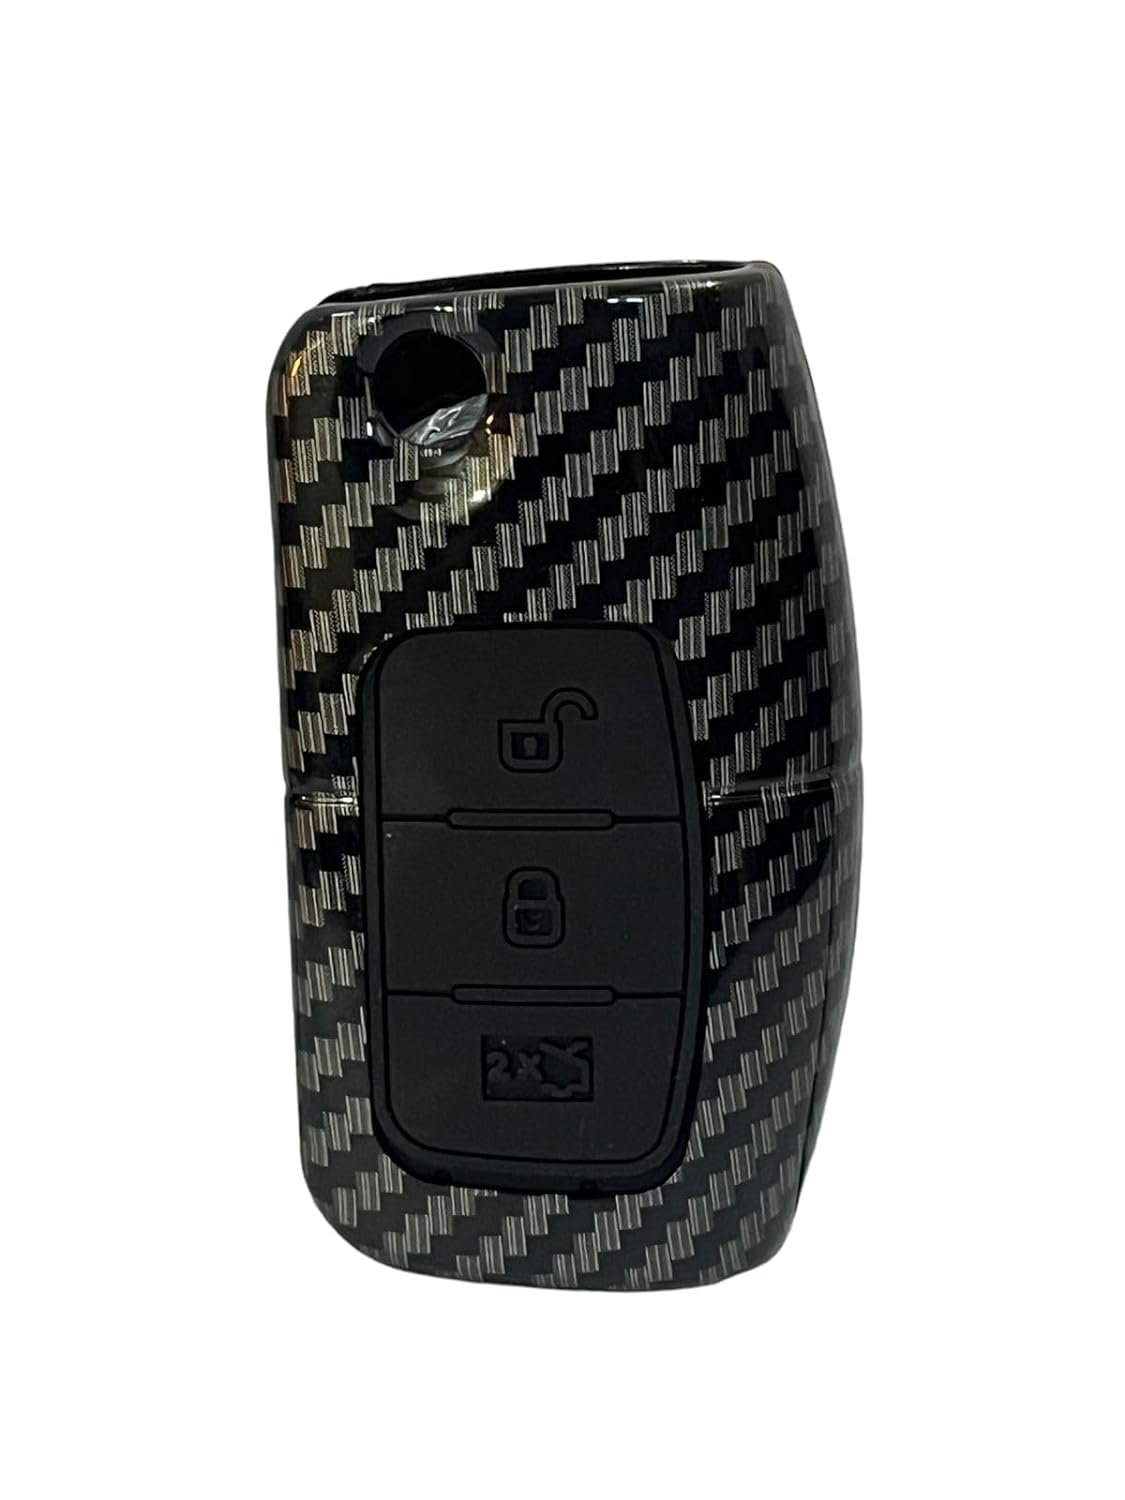 Carbon Fiber ABS Car Key Cover Compatible with Fiesta, Figo, Old Ecosport Flip Key (Key Chain Included) Image 